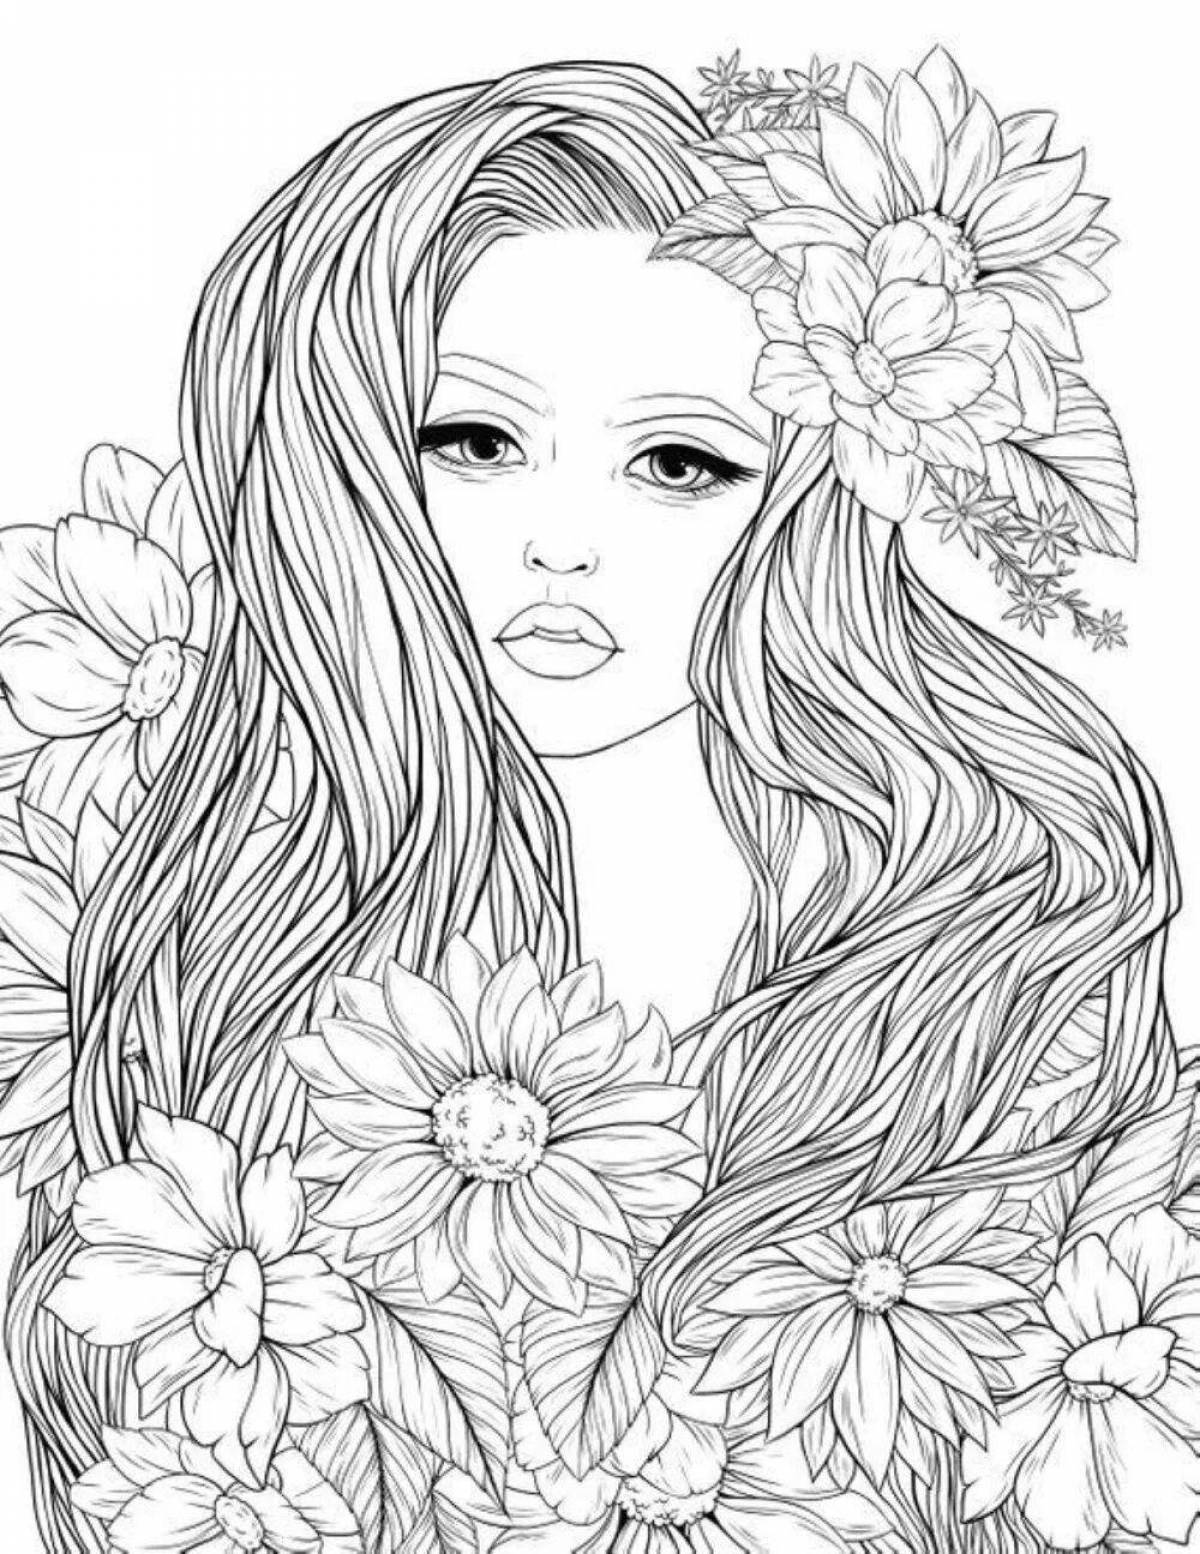 Great coloring book for girls 16-17 years old